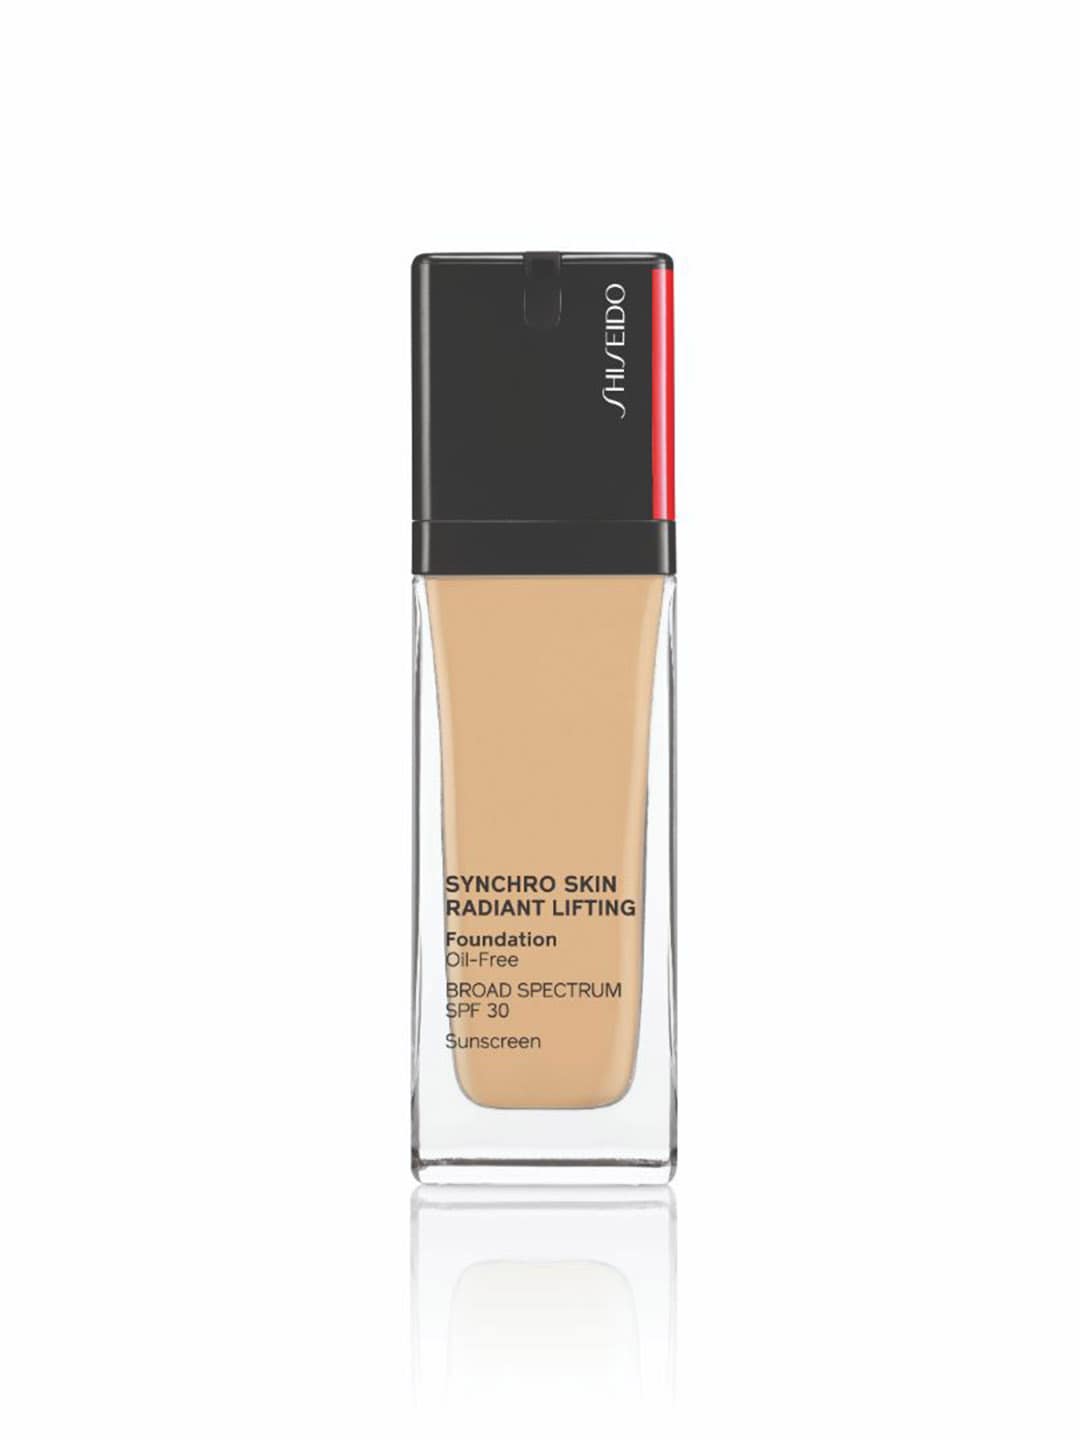 SHISEIDO Synchro Skin Radiant Lifting Foundation with SPF 30 - Alder 230 Price in India